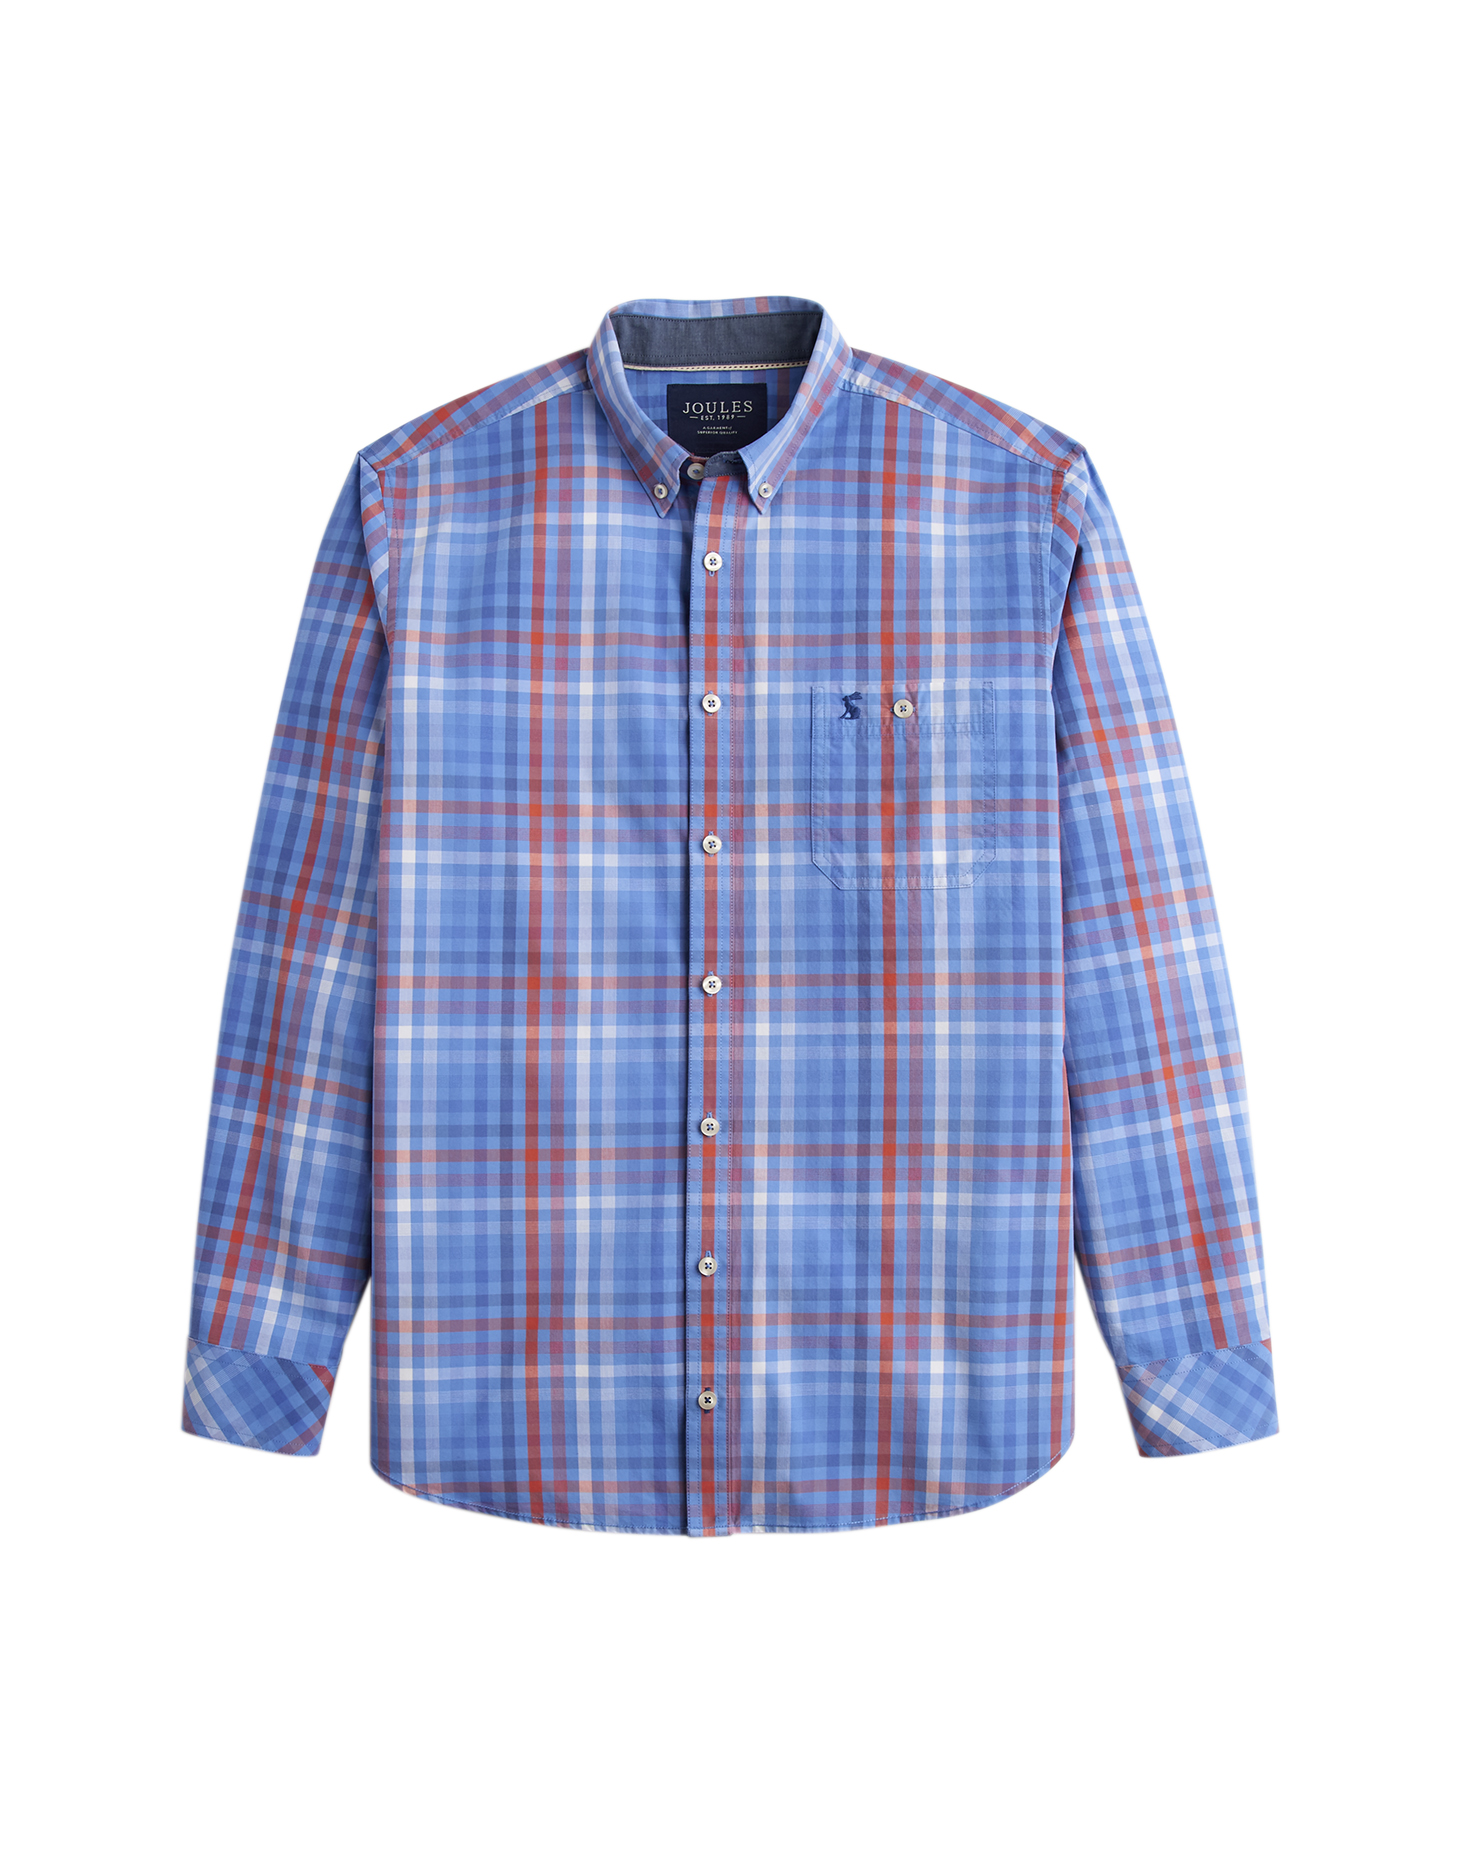 Joules Mens Hewney Classic Fit Shirt in Blue Check